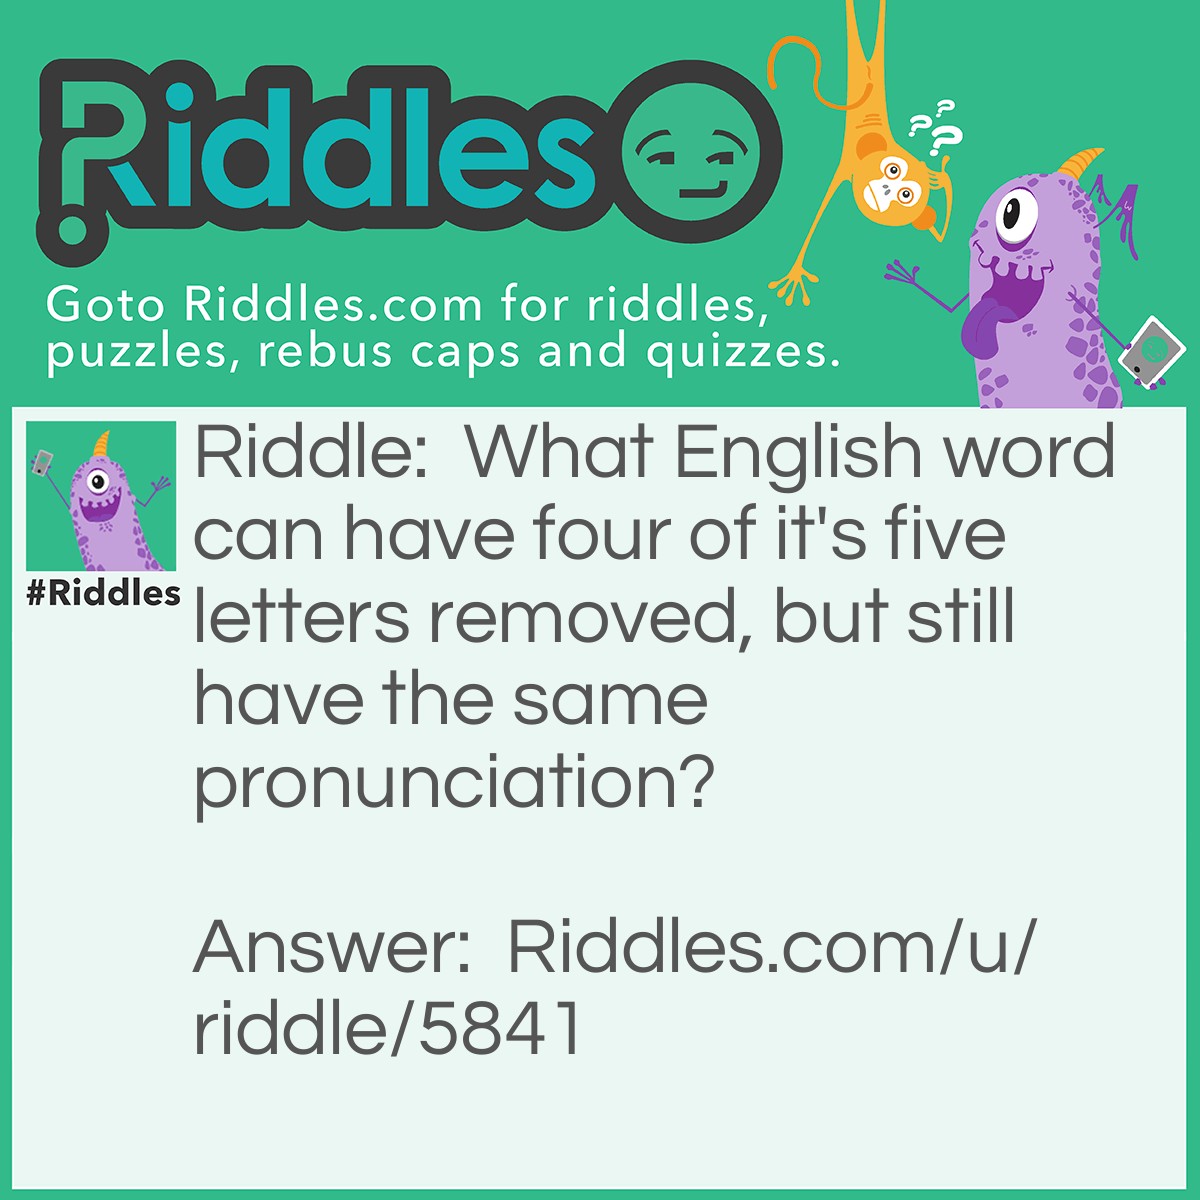 Riddle: What English word can have four of it's five letters removed, but still have the same pronunciation? Answer: queue (q)